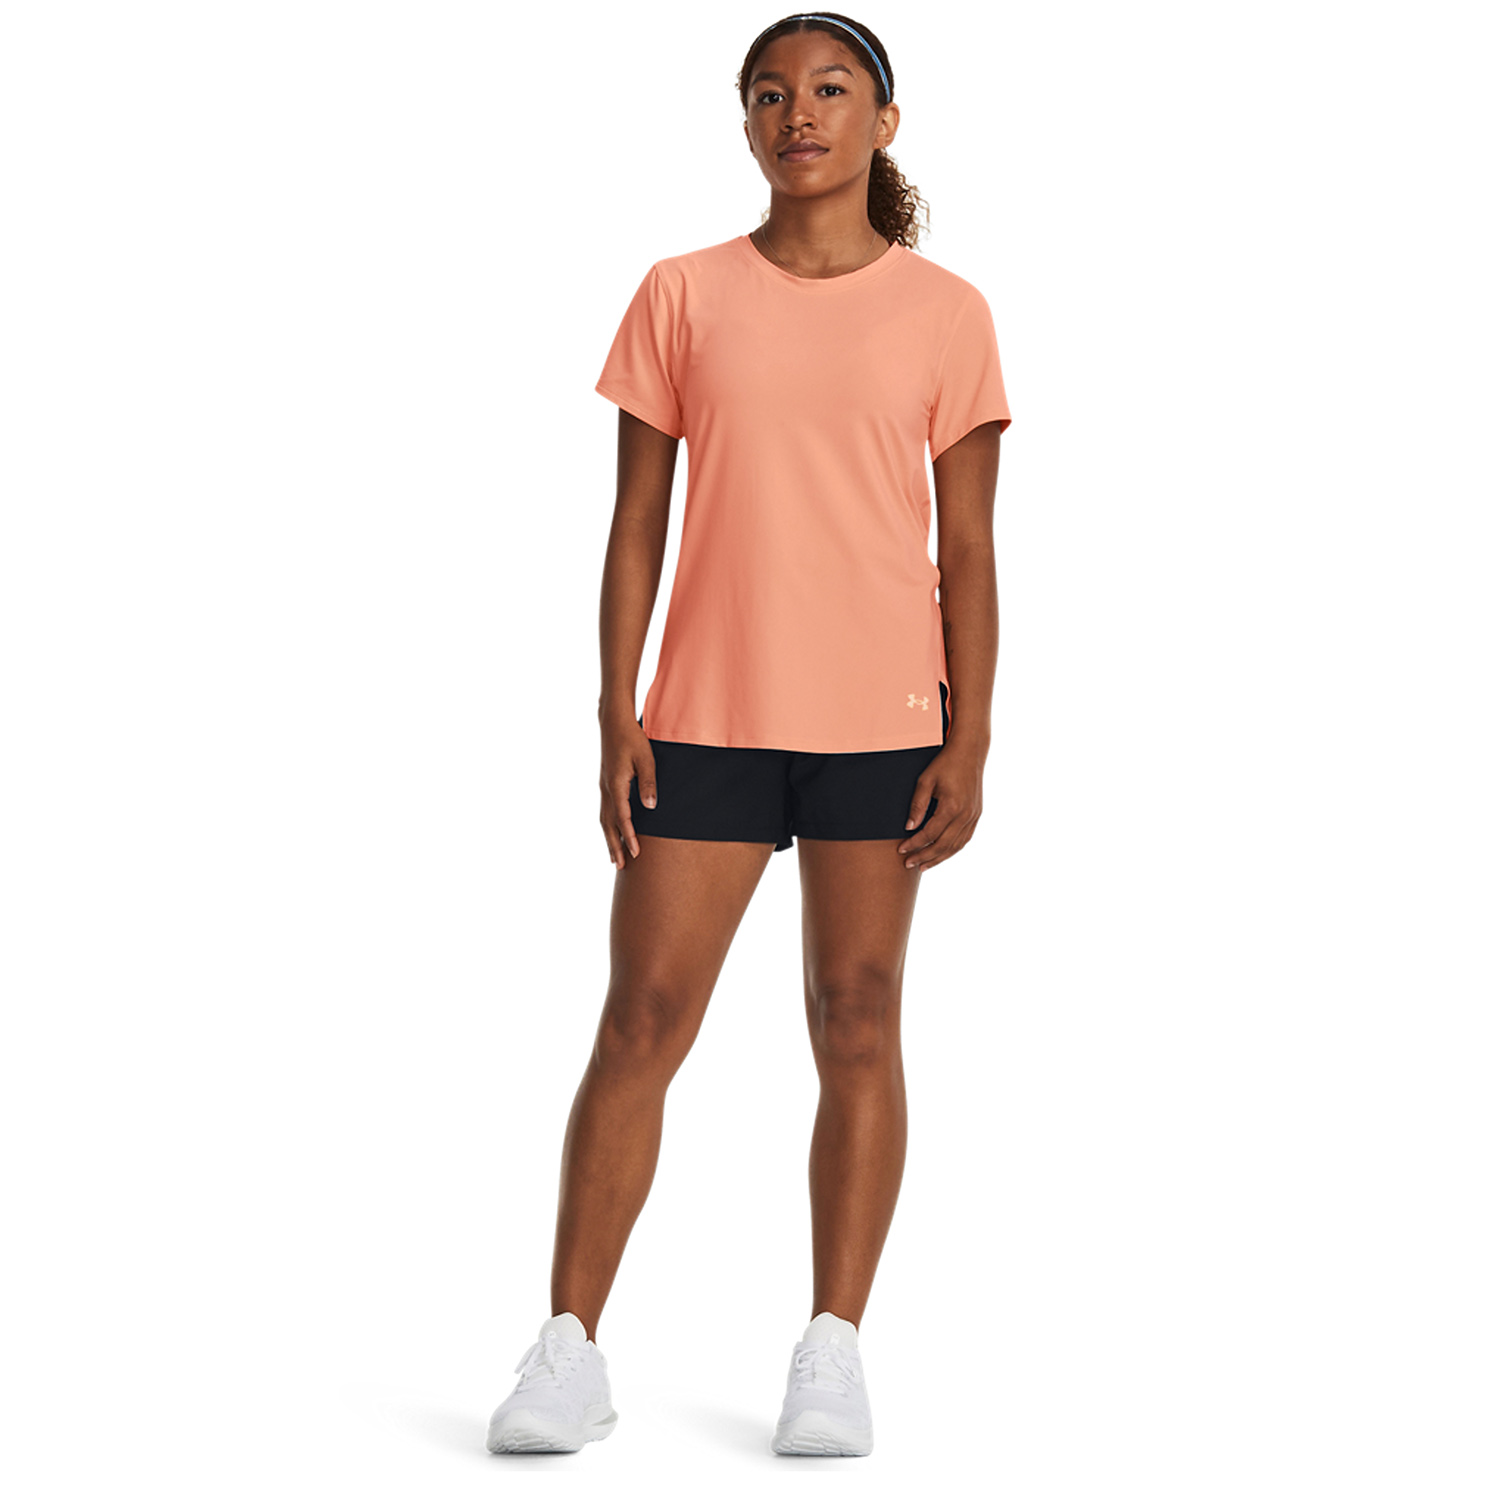 Under Armour Iso-Chill Laser T-Shirt - Bubble Peach/Reflective